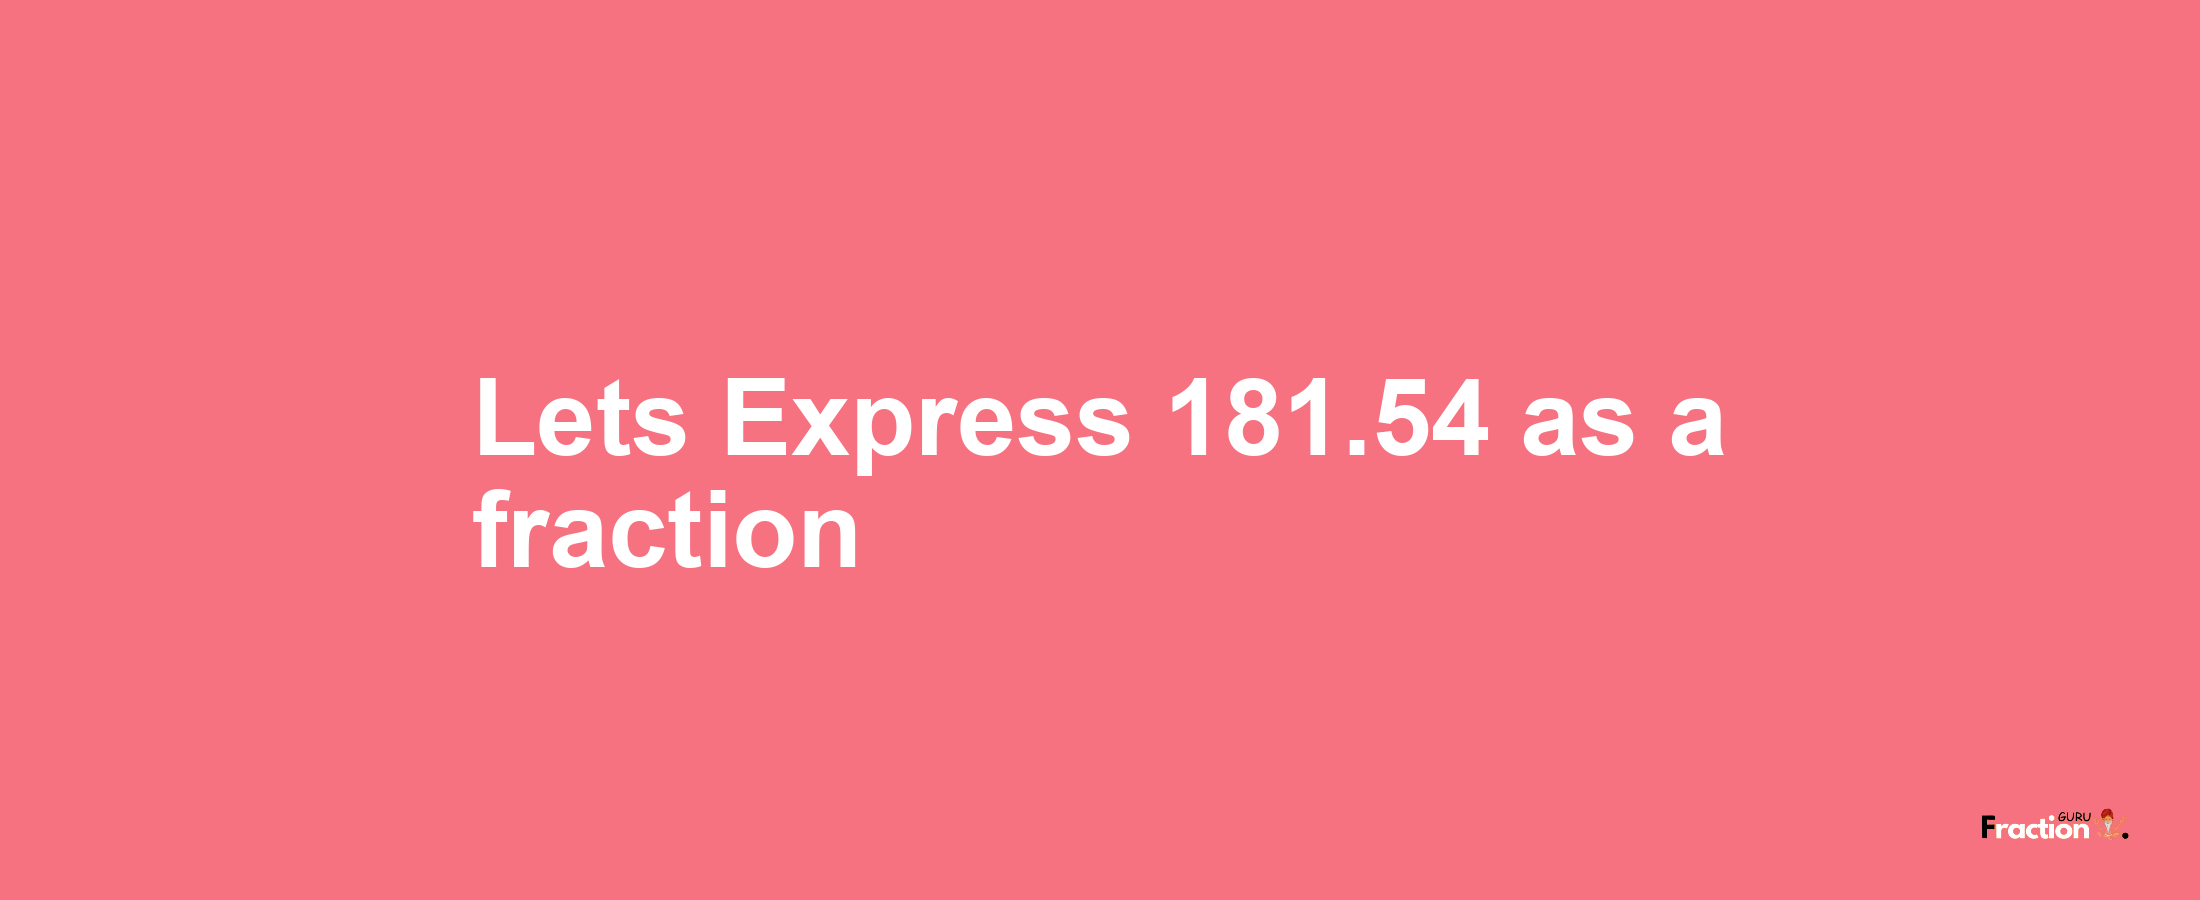 Lets Express 181.54 as afraction